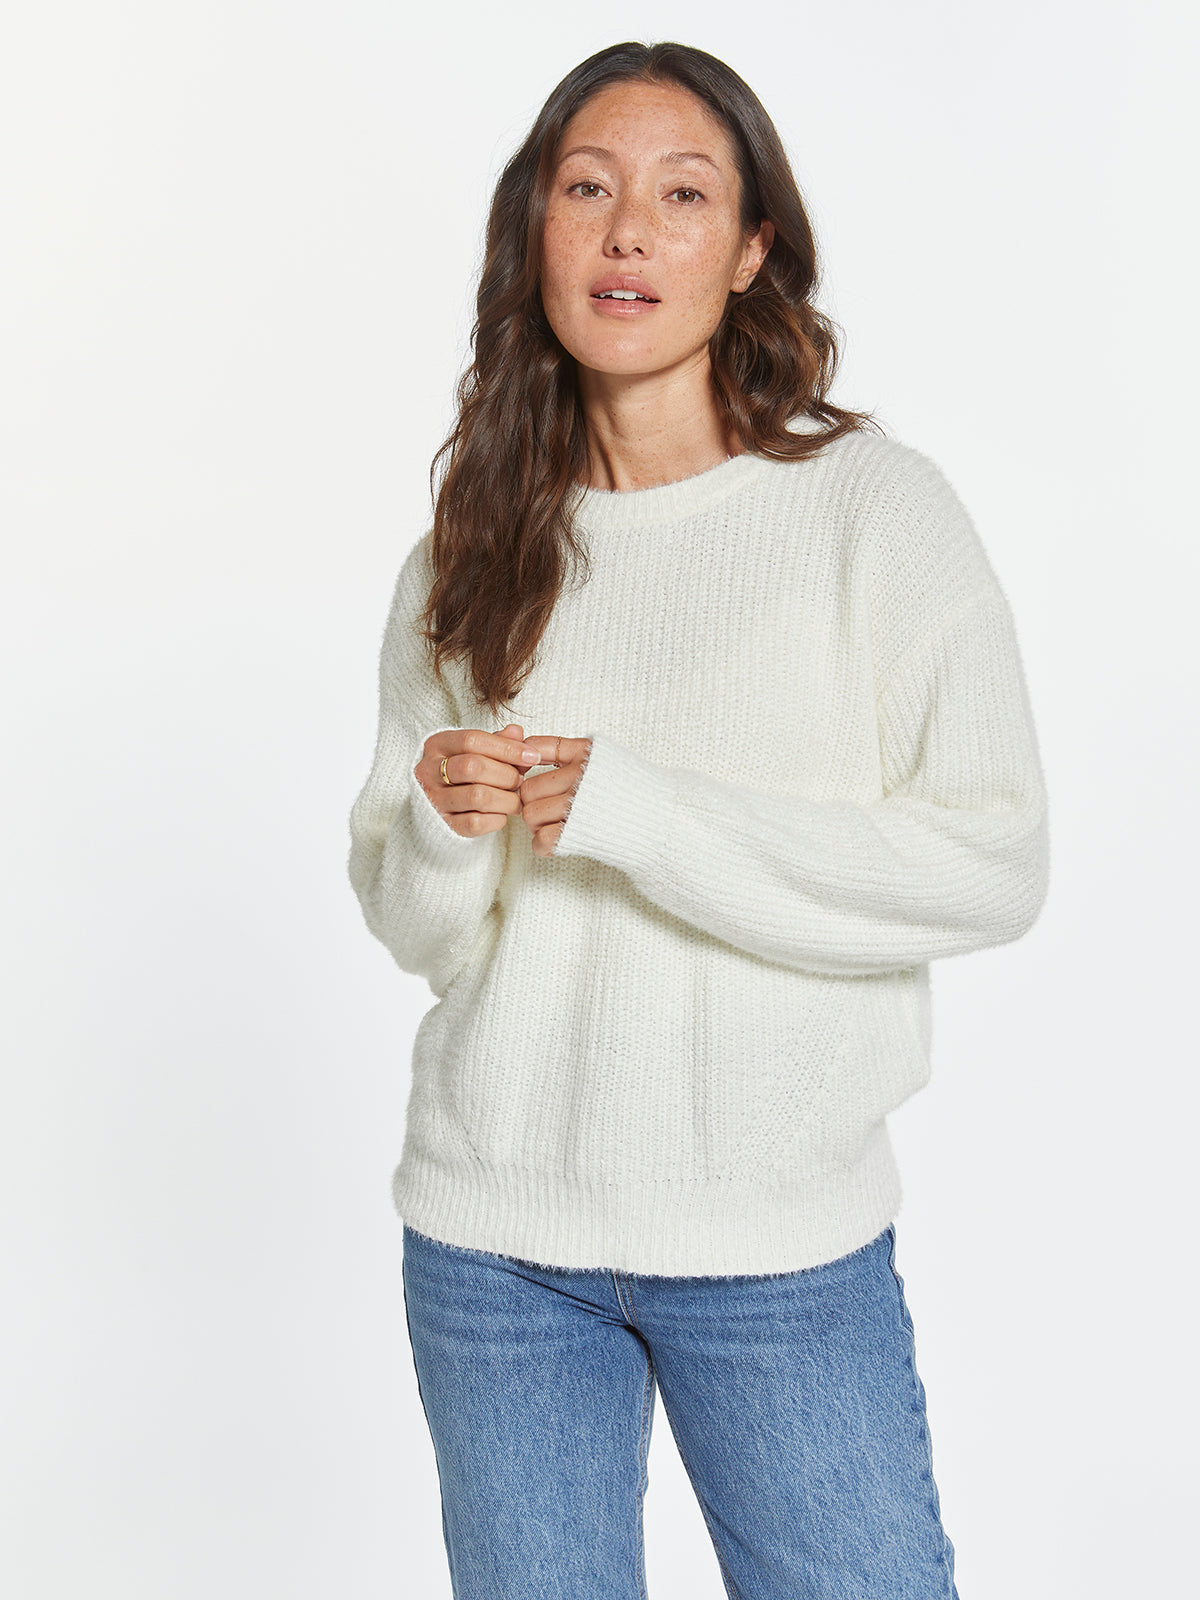 BELLE SWEATER - PRE PACK 6 UNITS